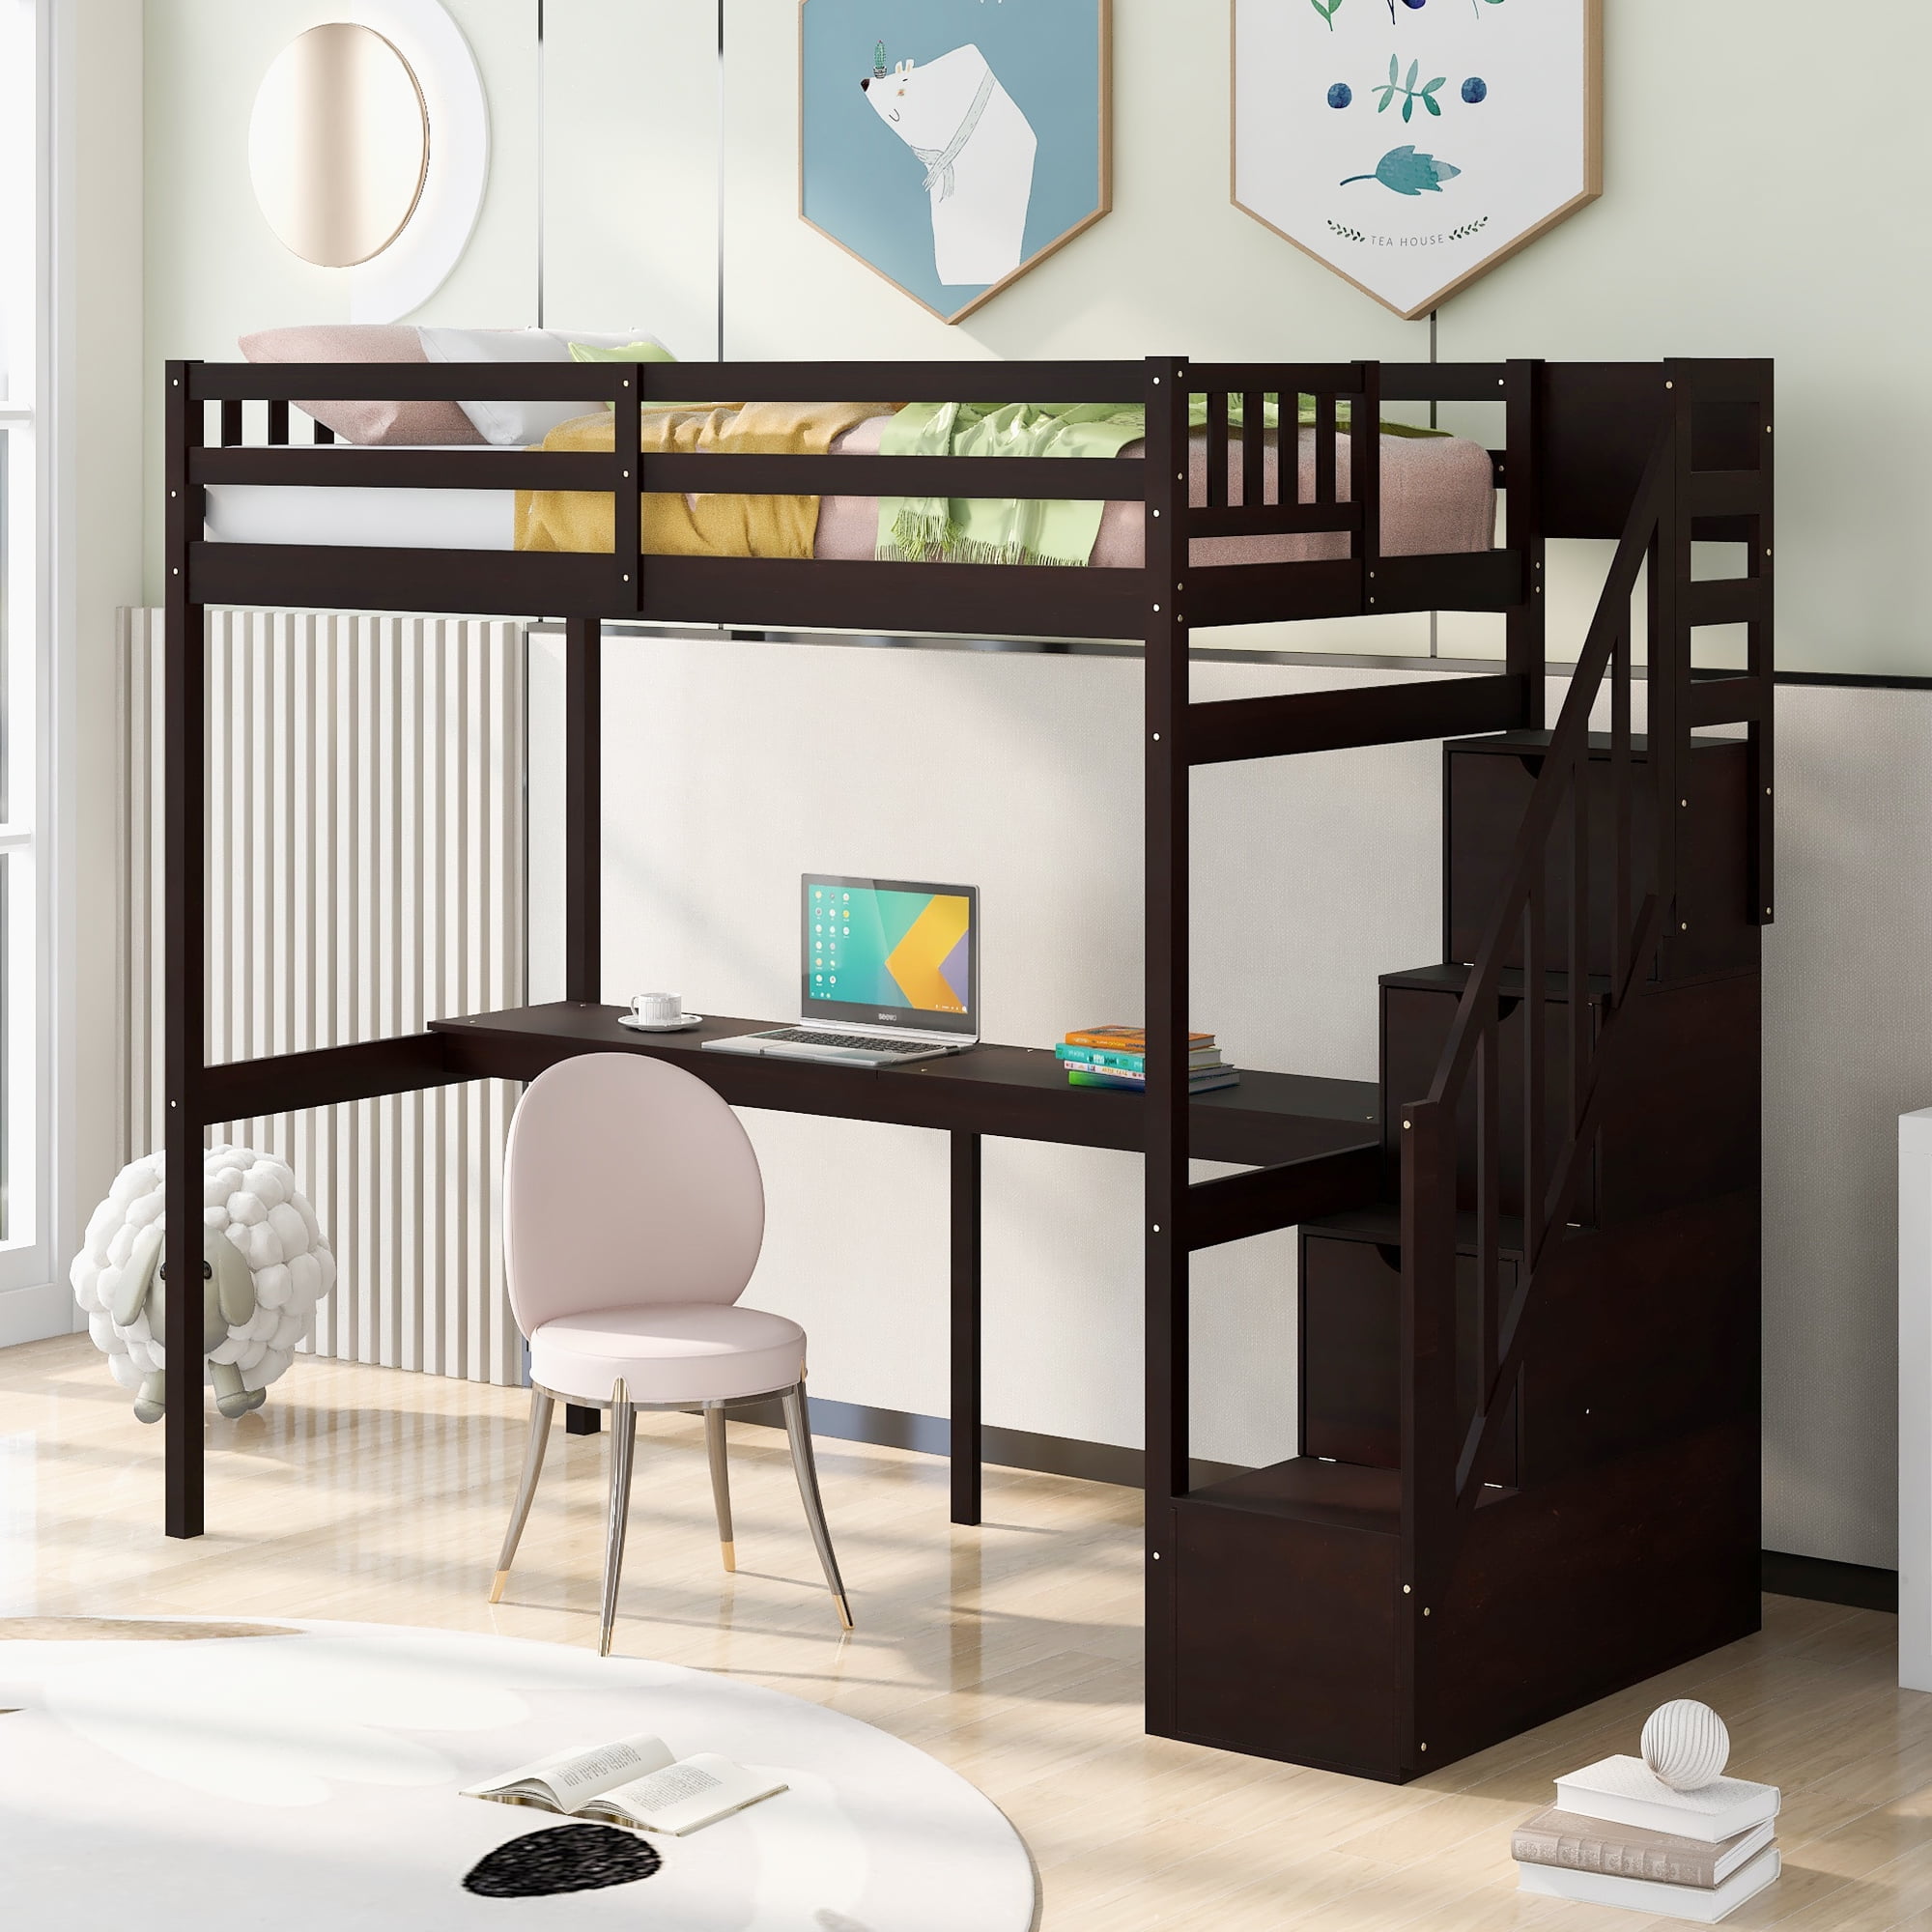 EUROCO Twin Size Loft Bed with Storage Staircase and Desk for Kids ...